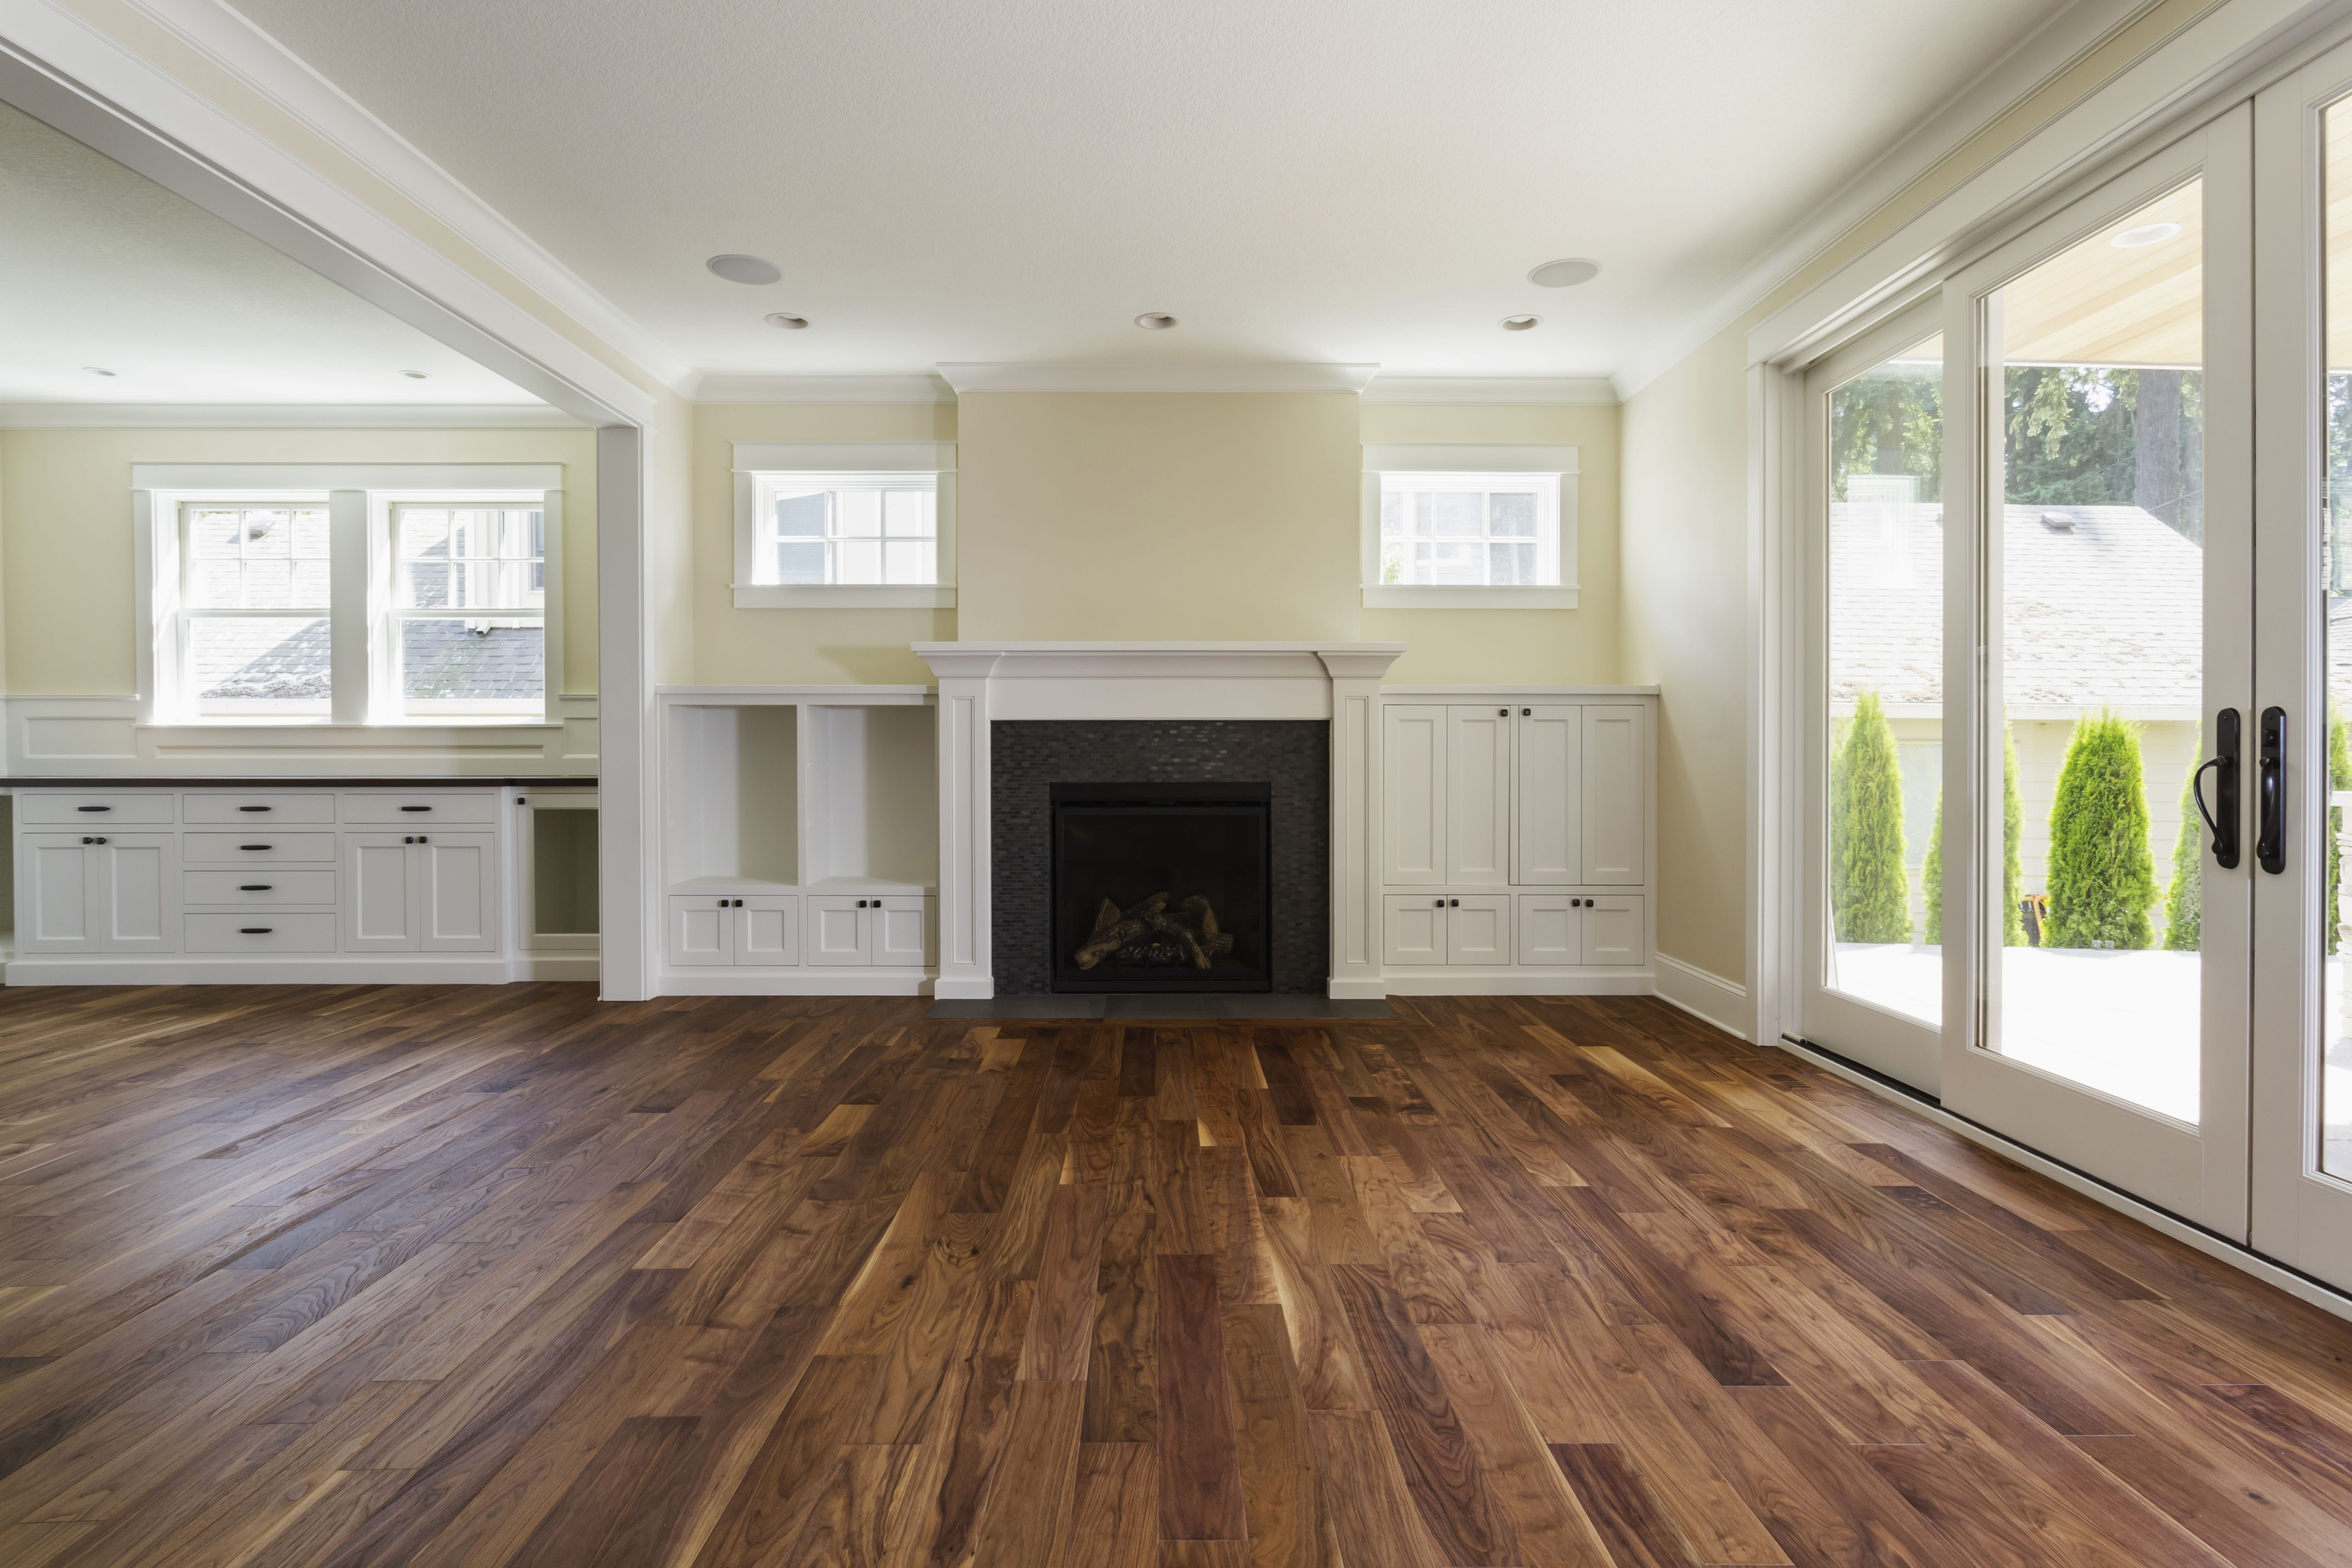 30 Great Wide Plank Hardwood Flooring Problems 2024 free download wide plank hardwood flooring problems of the pros and cons of prefinished hardwood flooring regarding fireplace and built in shelves in living room 482143011 57bef8e33df78cc16e035397